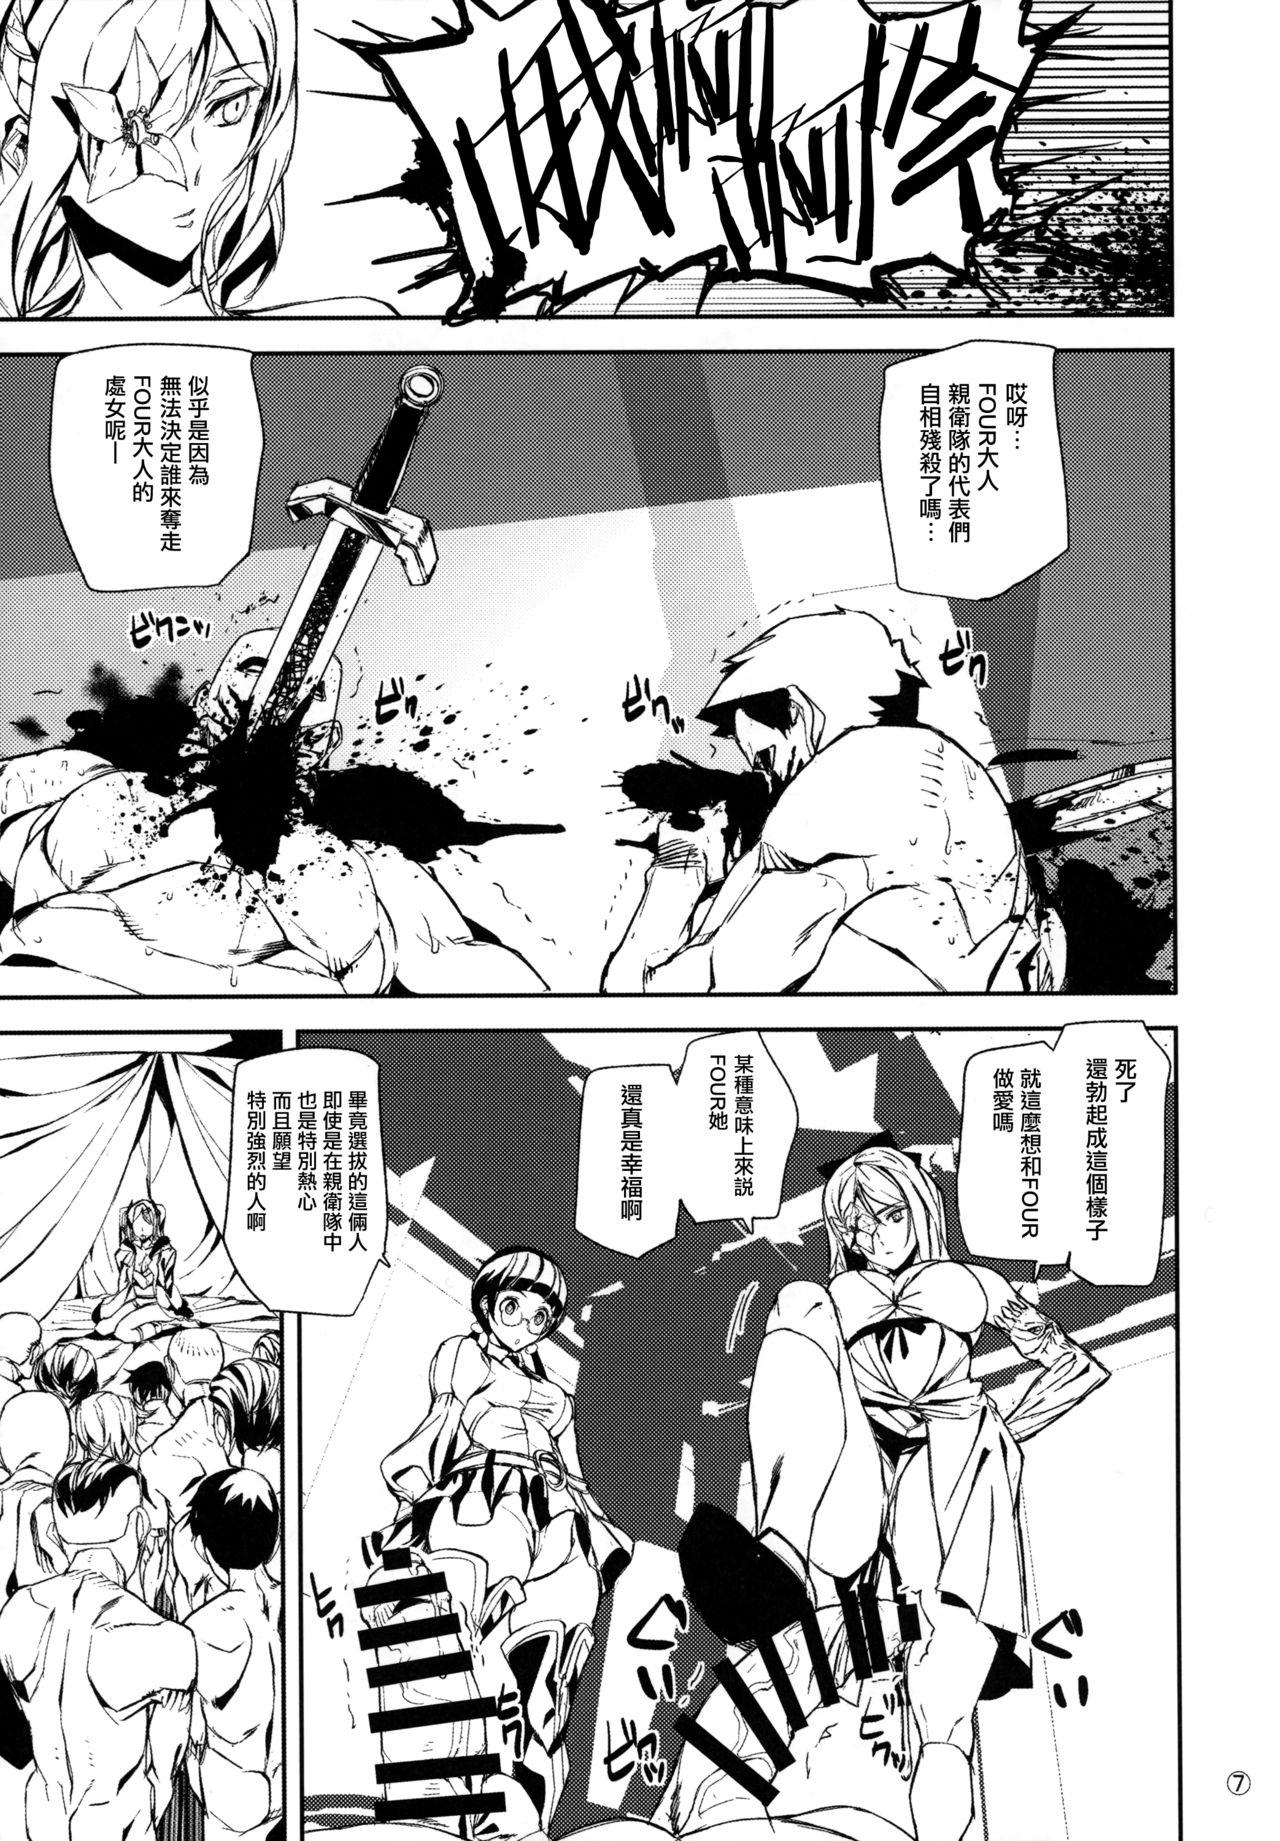 Hairy Fourth the dream - Drakengard Flogging - Page 7